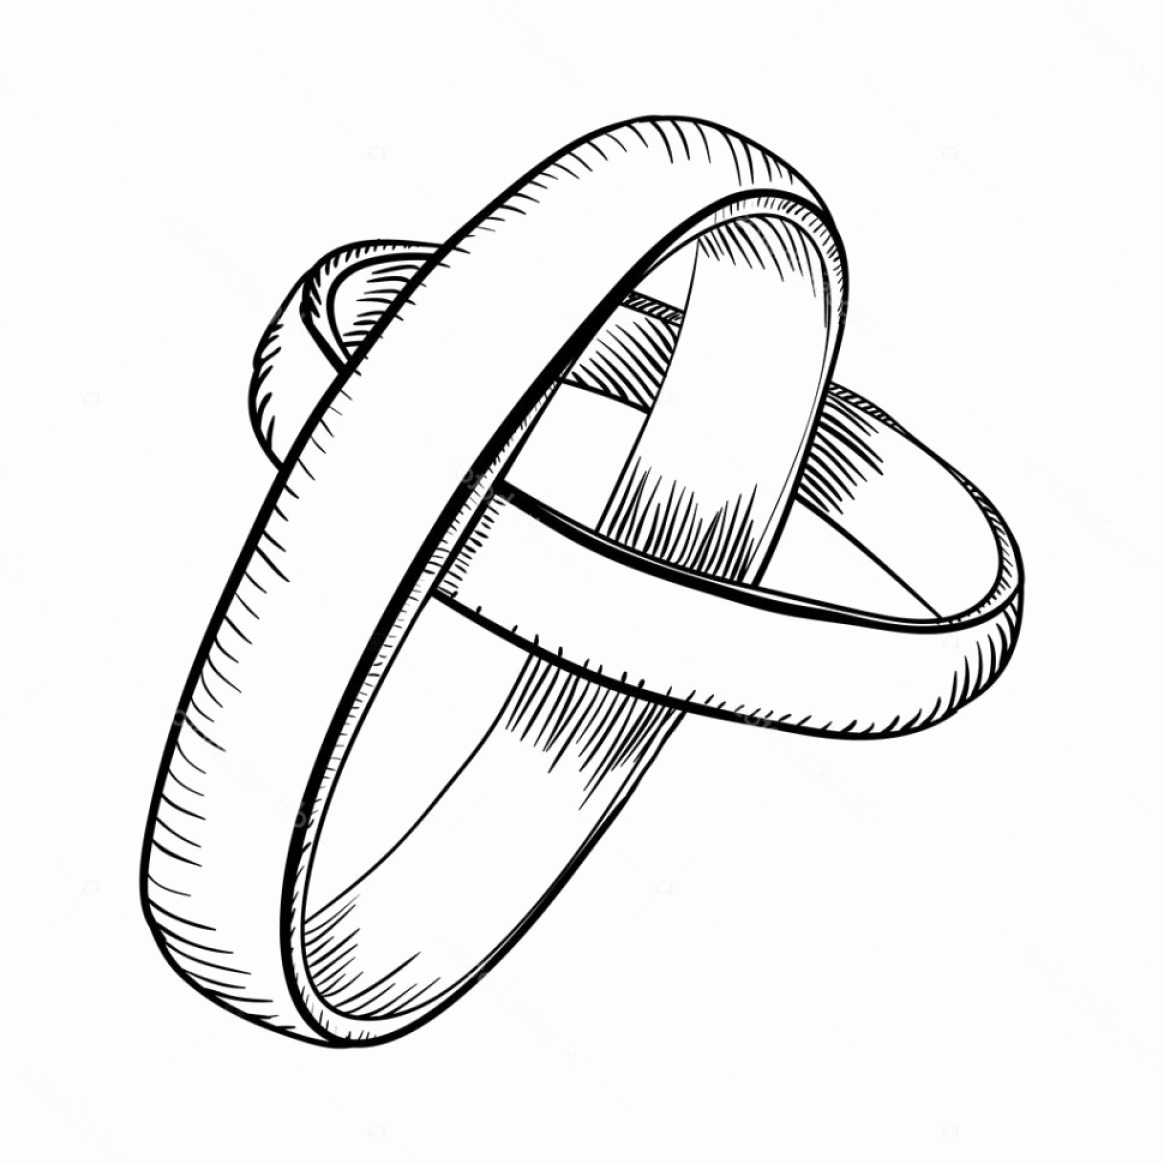 How To Draw A Wedding Ring - Wedding Rings Sets Ideas